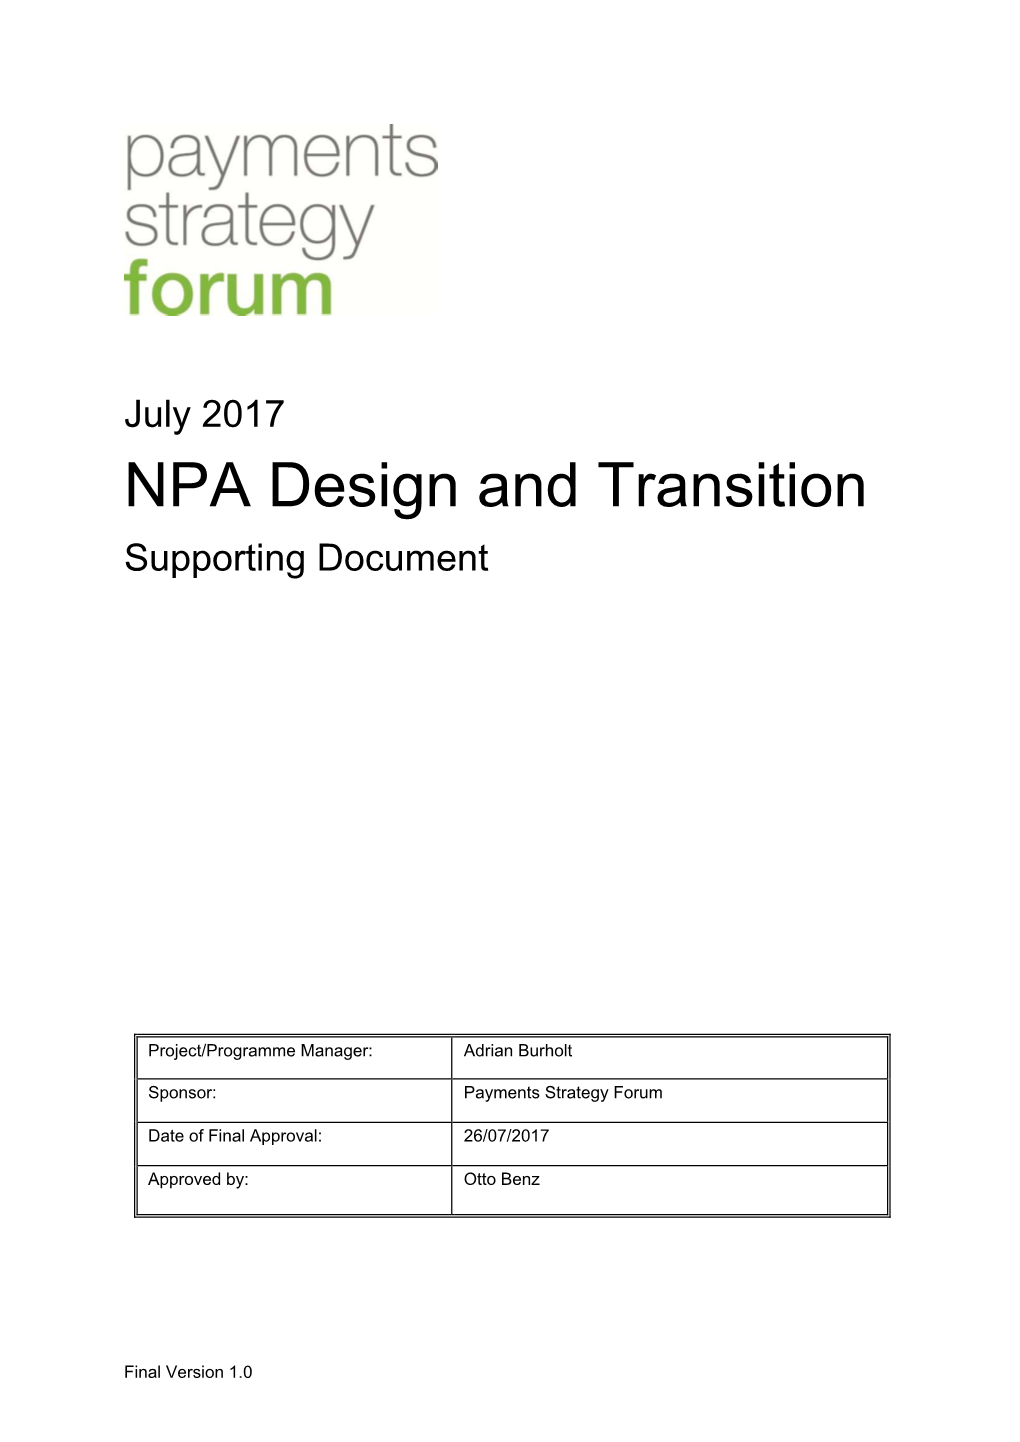 July 2017 NPA Design and Transition Supporting Document